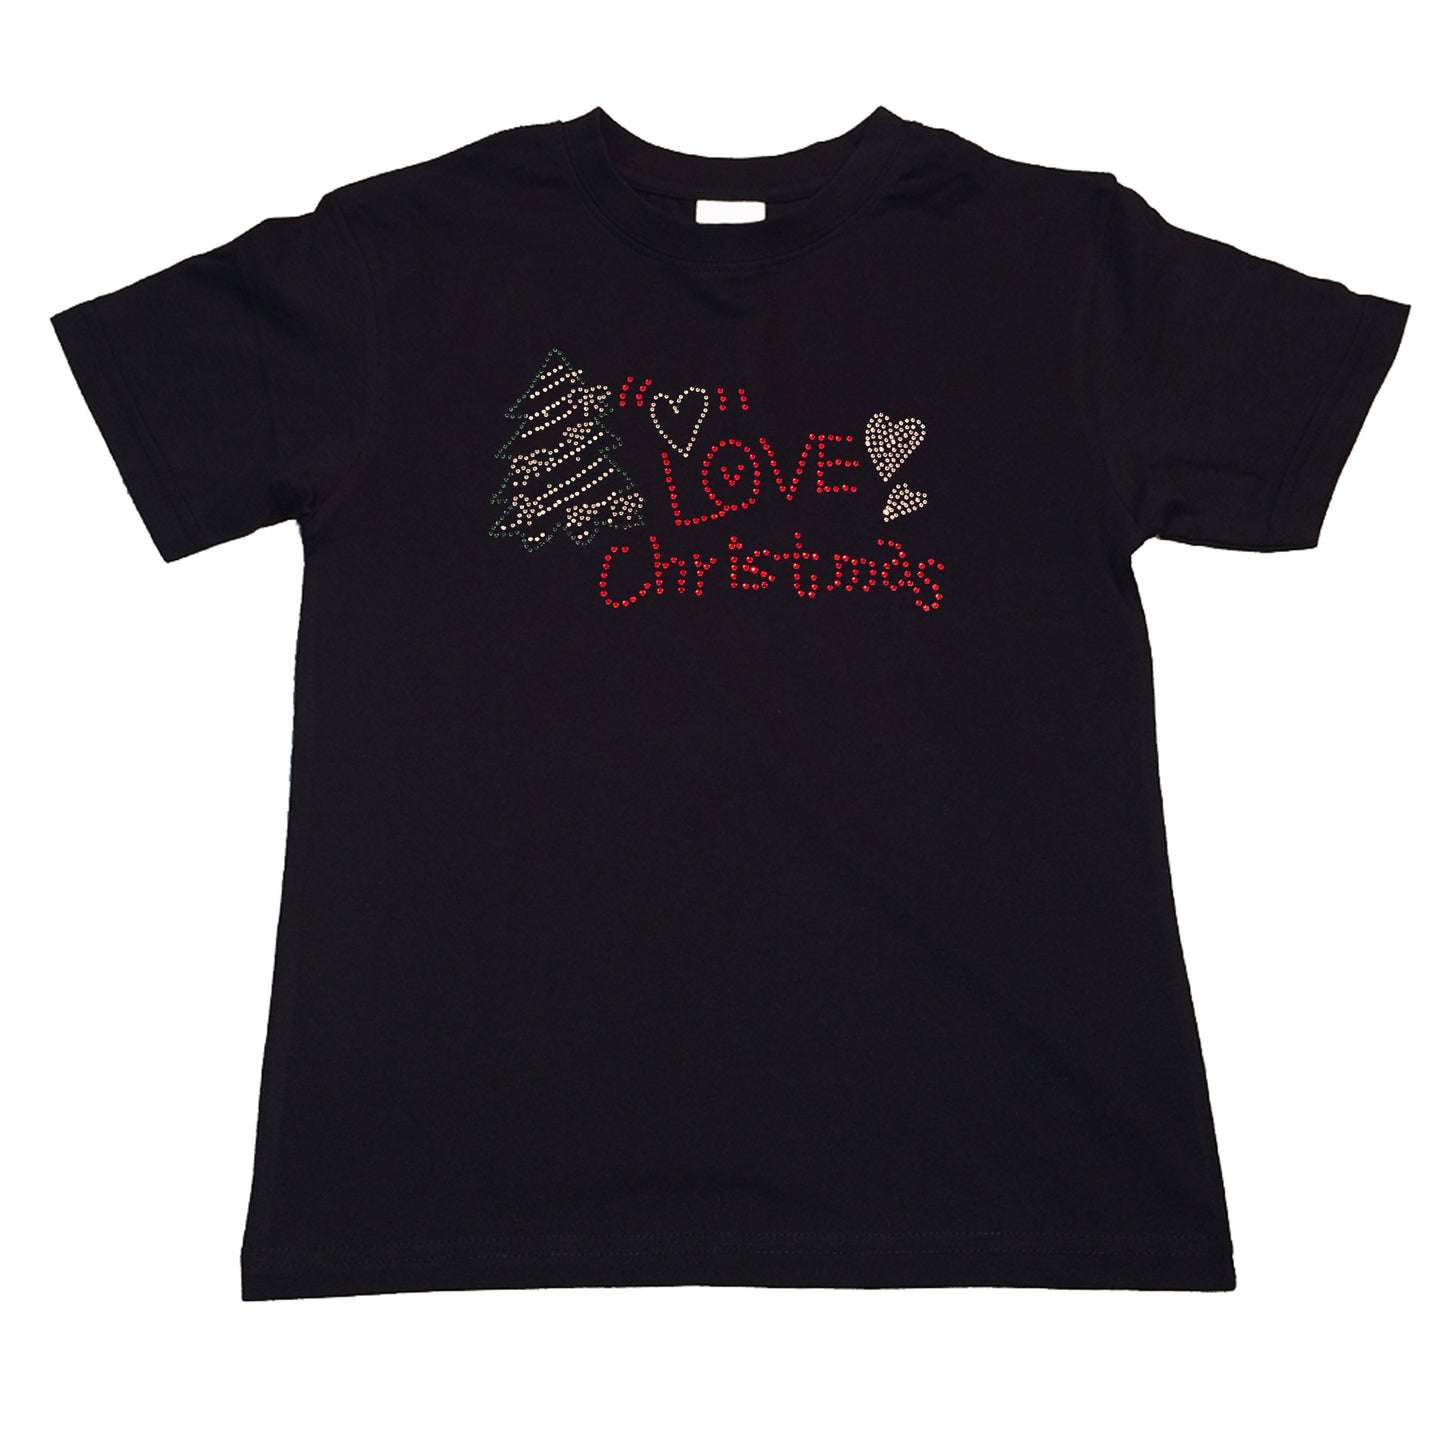 Girls Rhinestone T-Shirt " Love Christmas with Tree in Rhinestones " Kids Size 3 to 14 Available